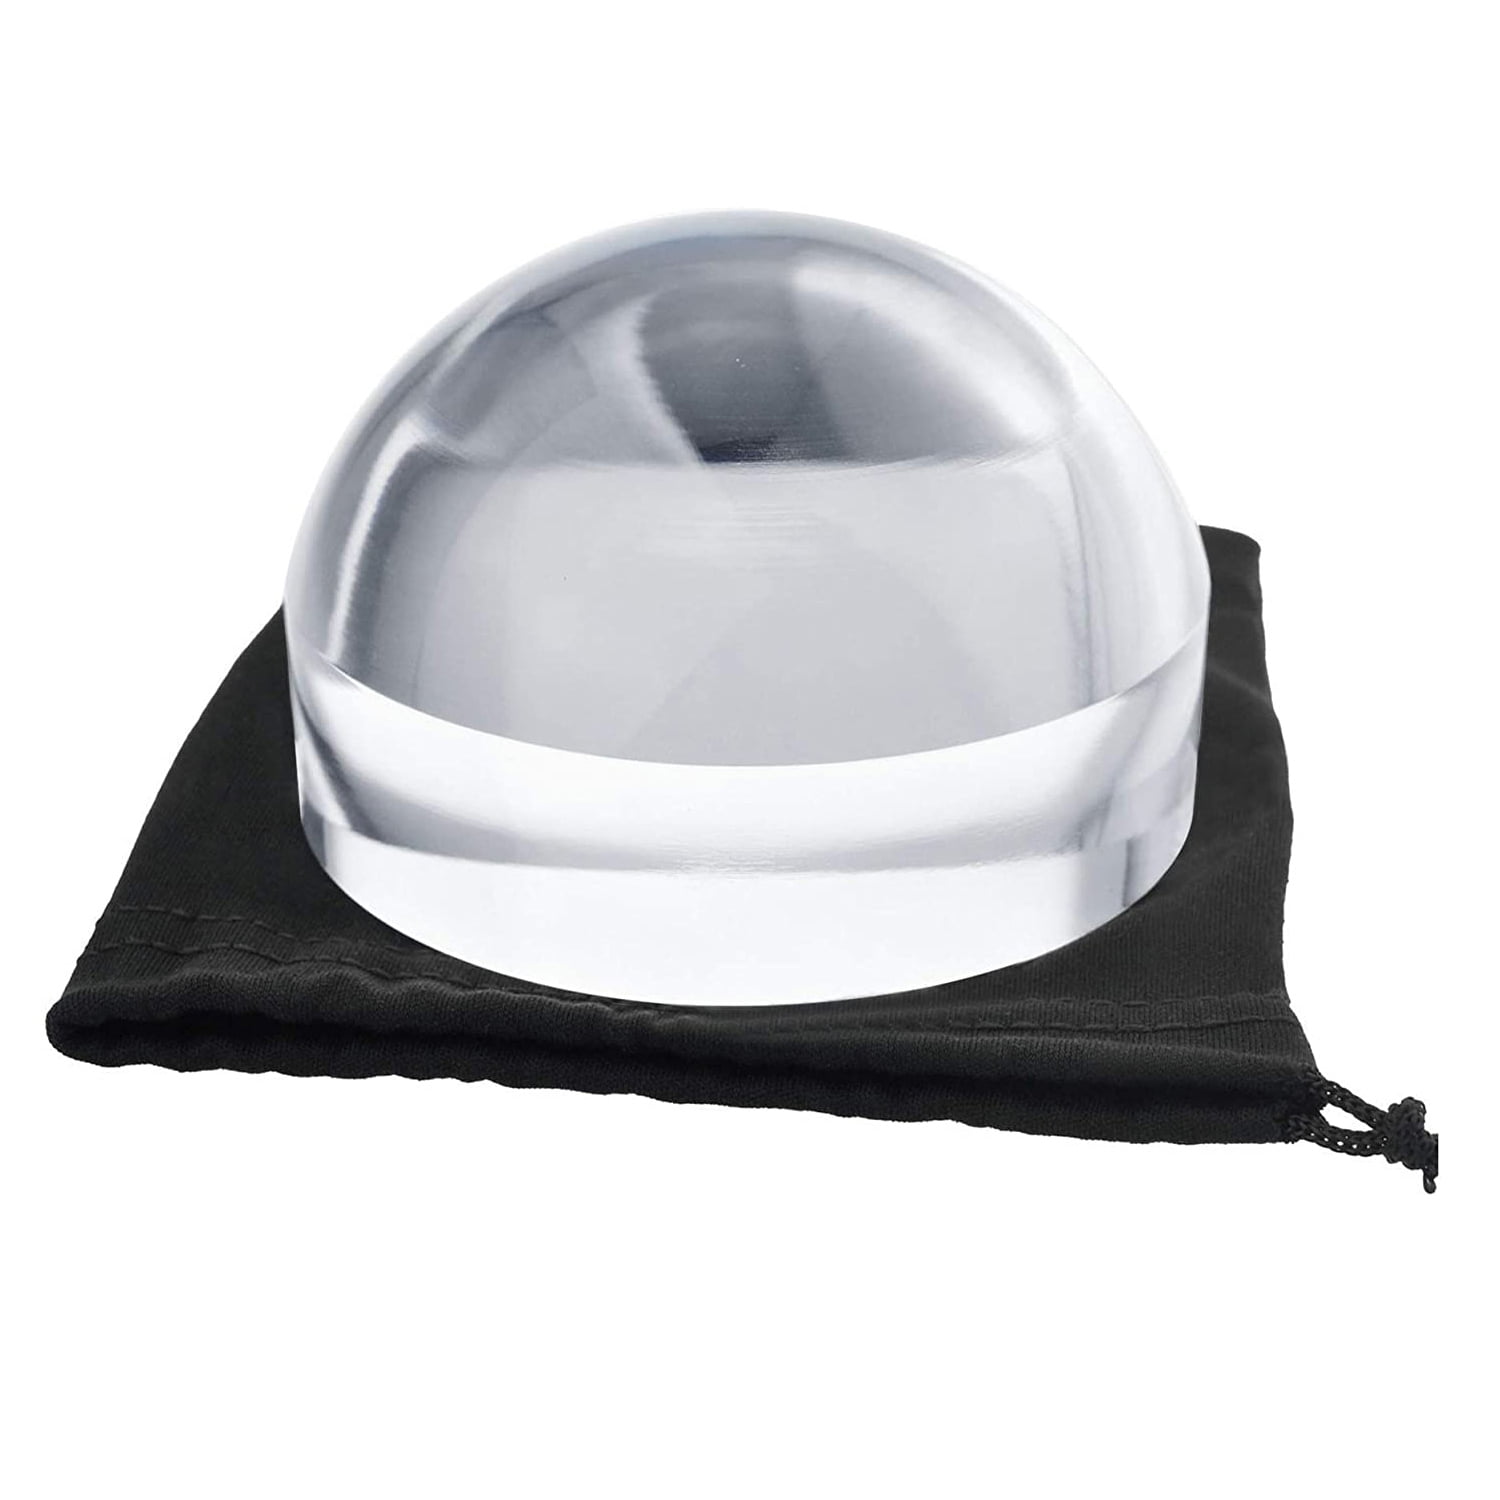 Dome Magnifier 1.8 Inch 4x magnification made of optical grade acrylic and  comes with storage/polishing pouch